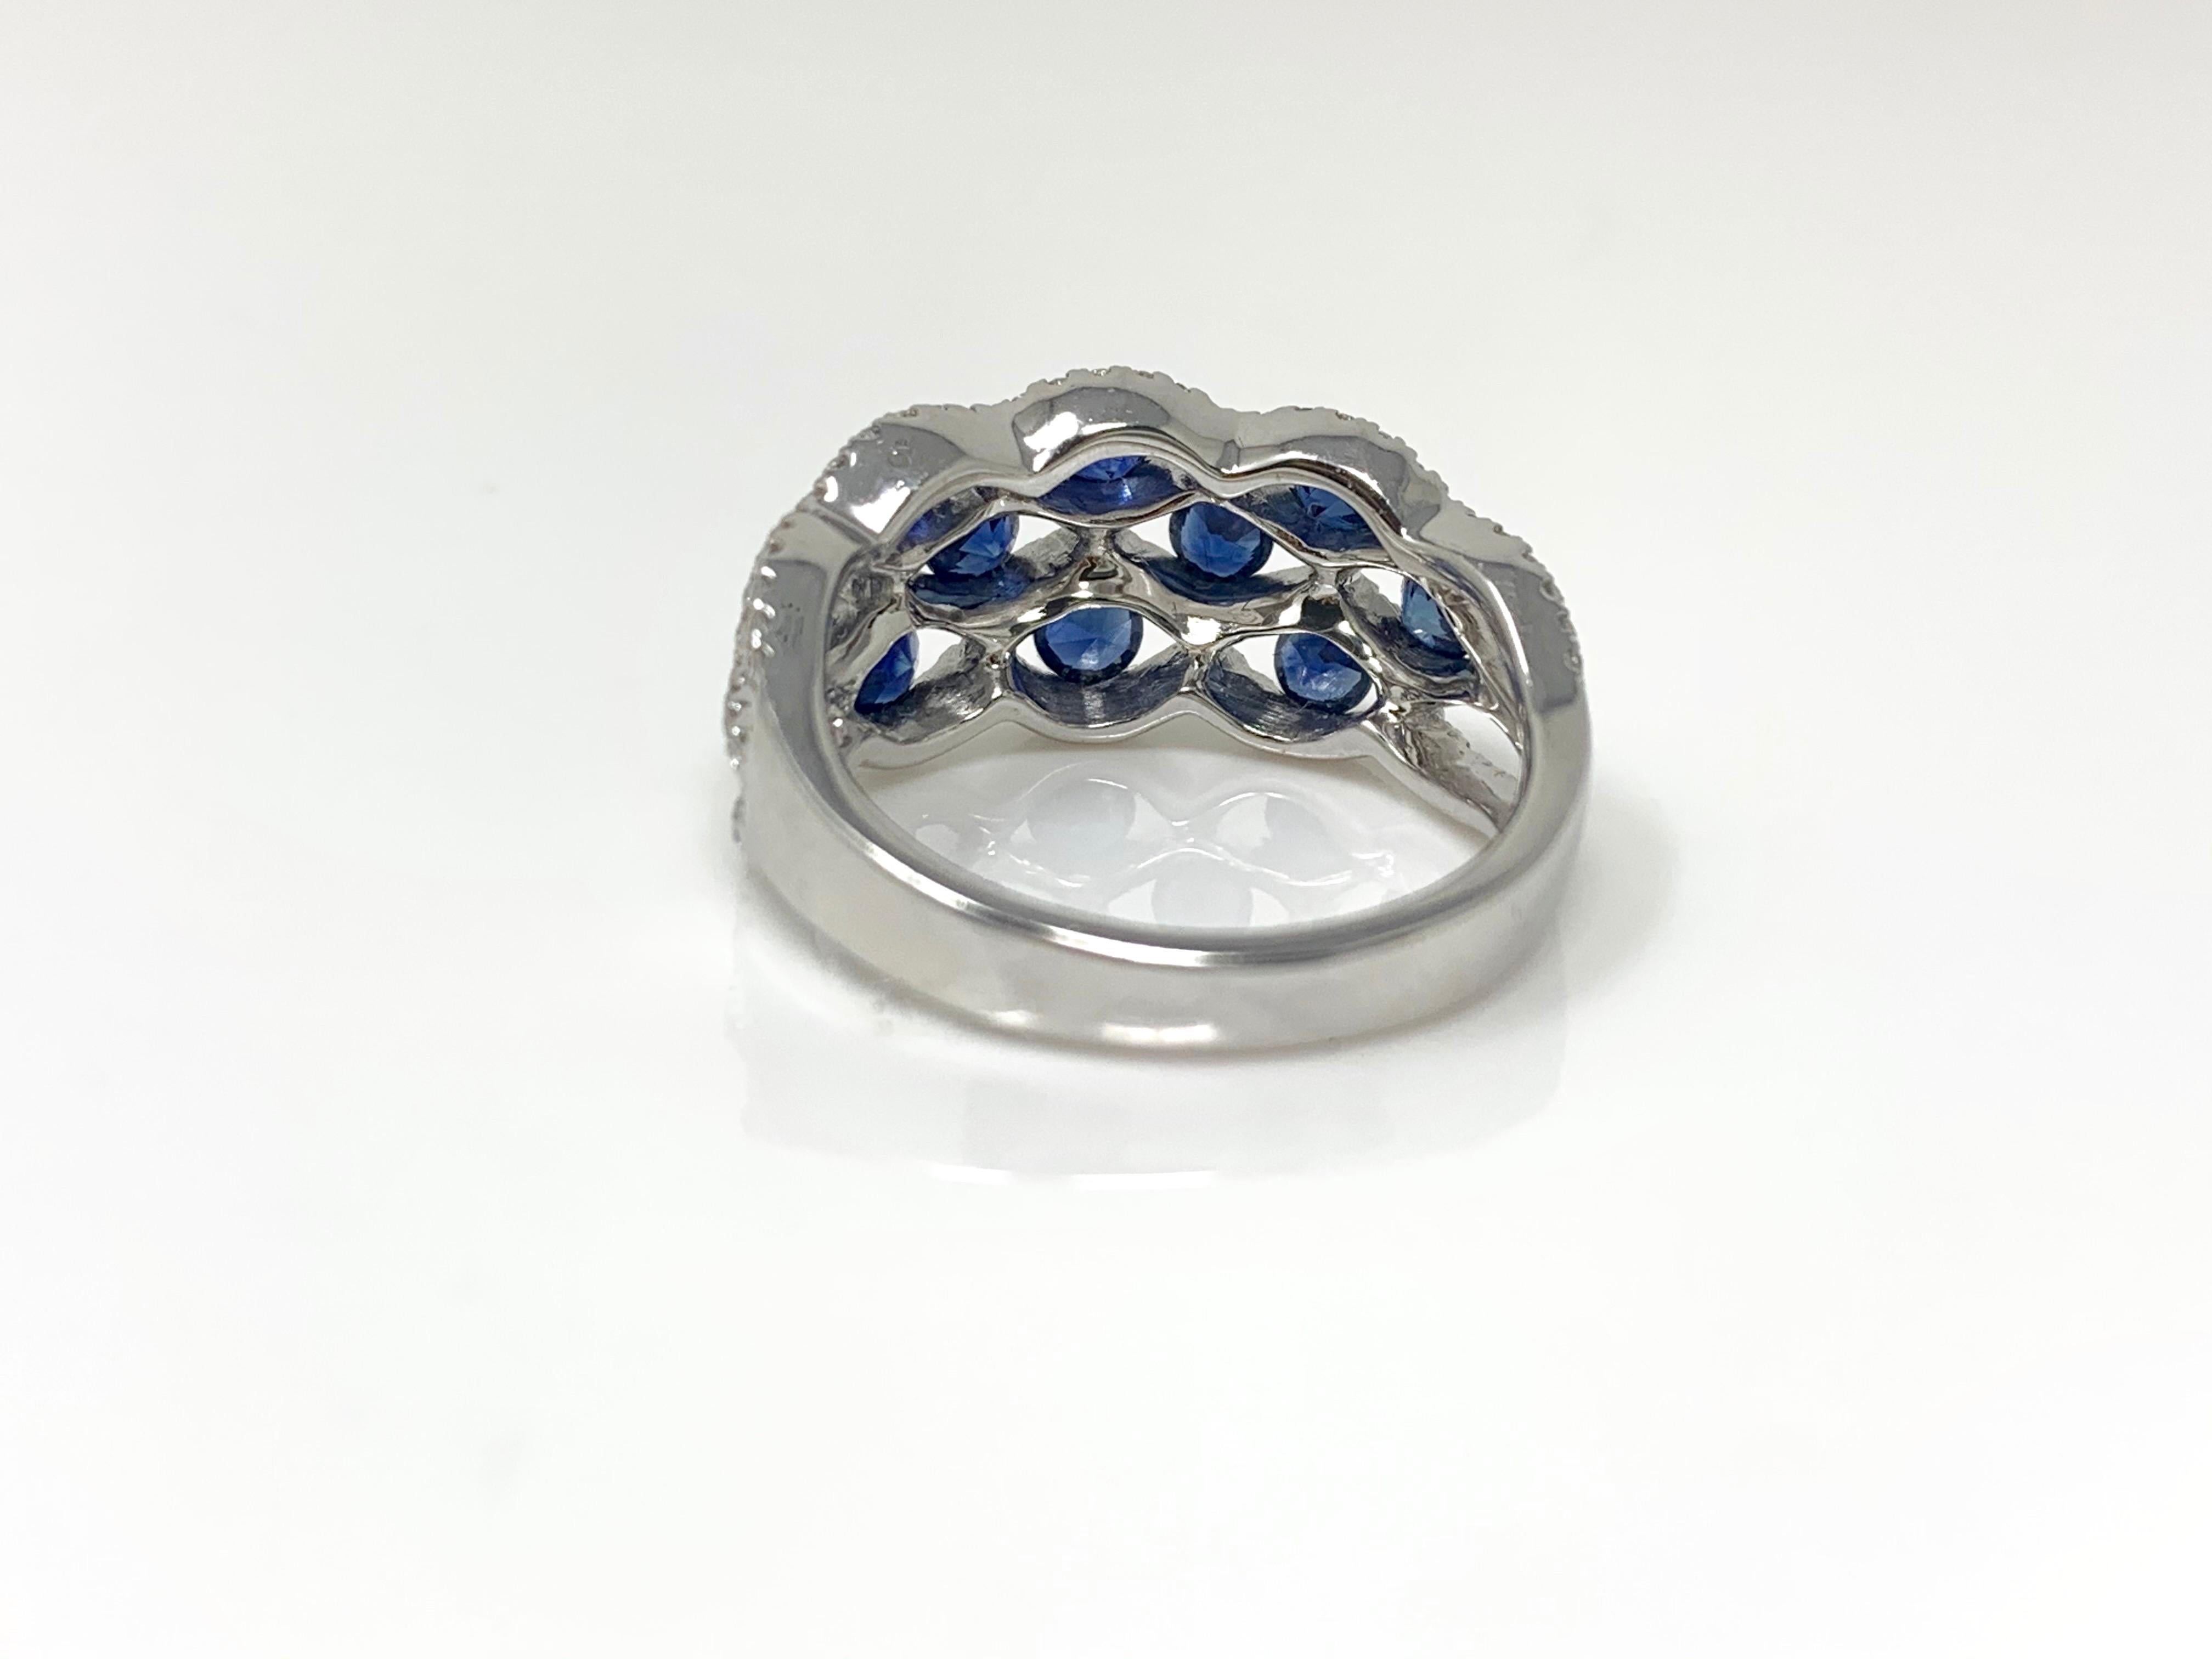 Contemporary Blue Sapphire and White Diamond Ring in 18 Karat White Gold